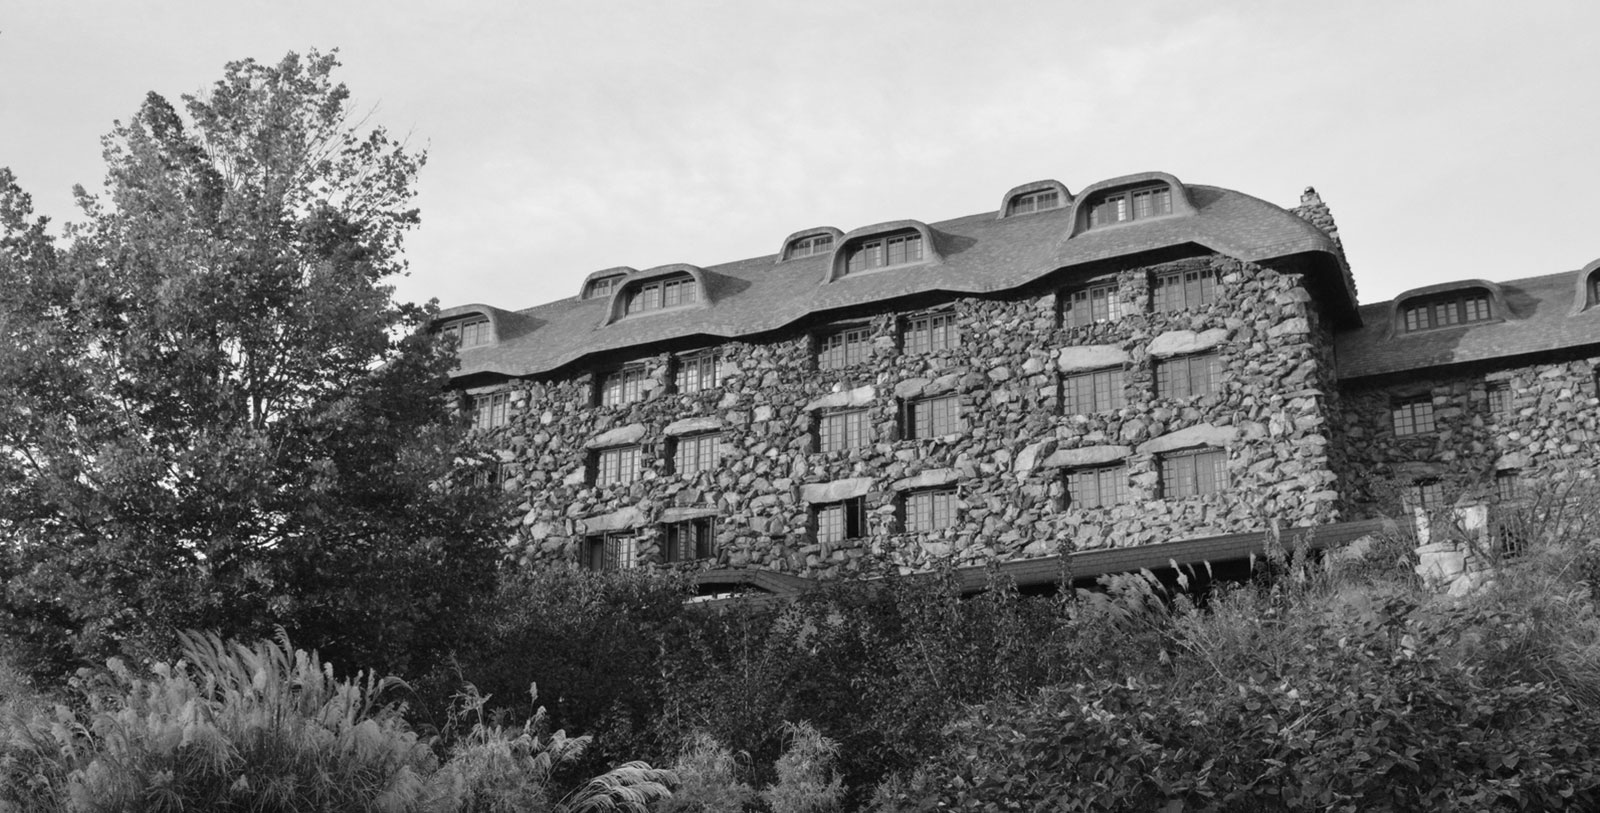 Image of Hotel Exterior The Omni Grove Park Inn, 1913, Member of Historic Hotels of America, in Asheville, North Carolina, Special Offers, Discounted Rates, Families, Romantic Escape, Honeymoons, Anniversaries, Reunions